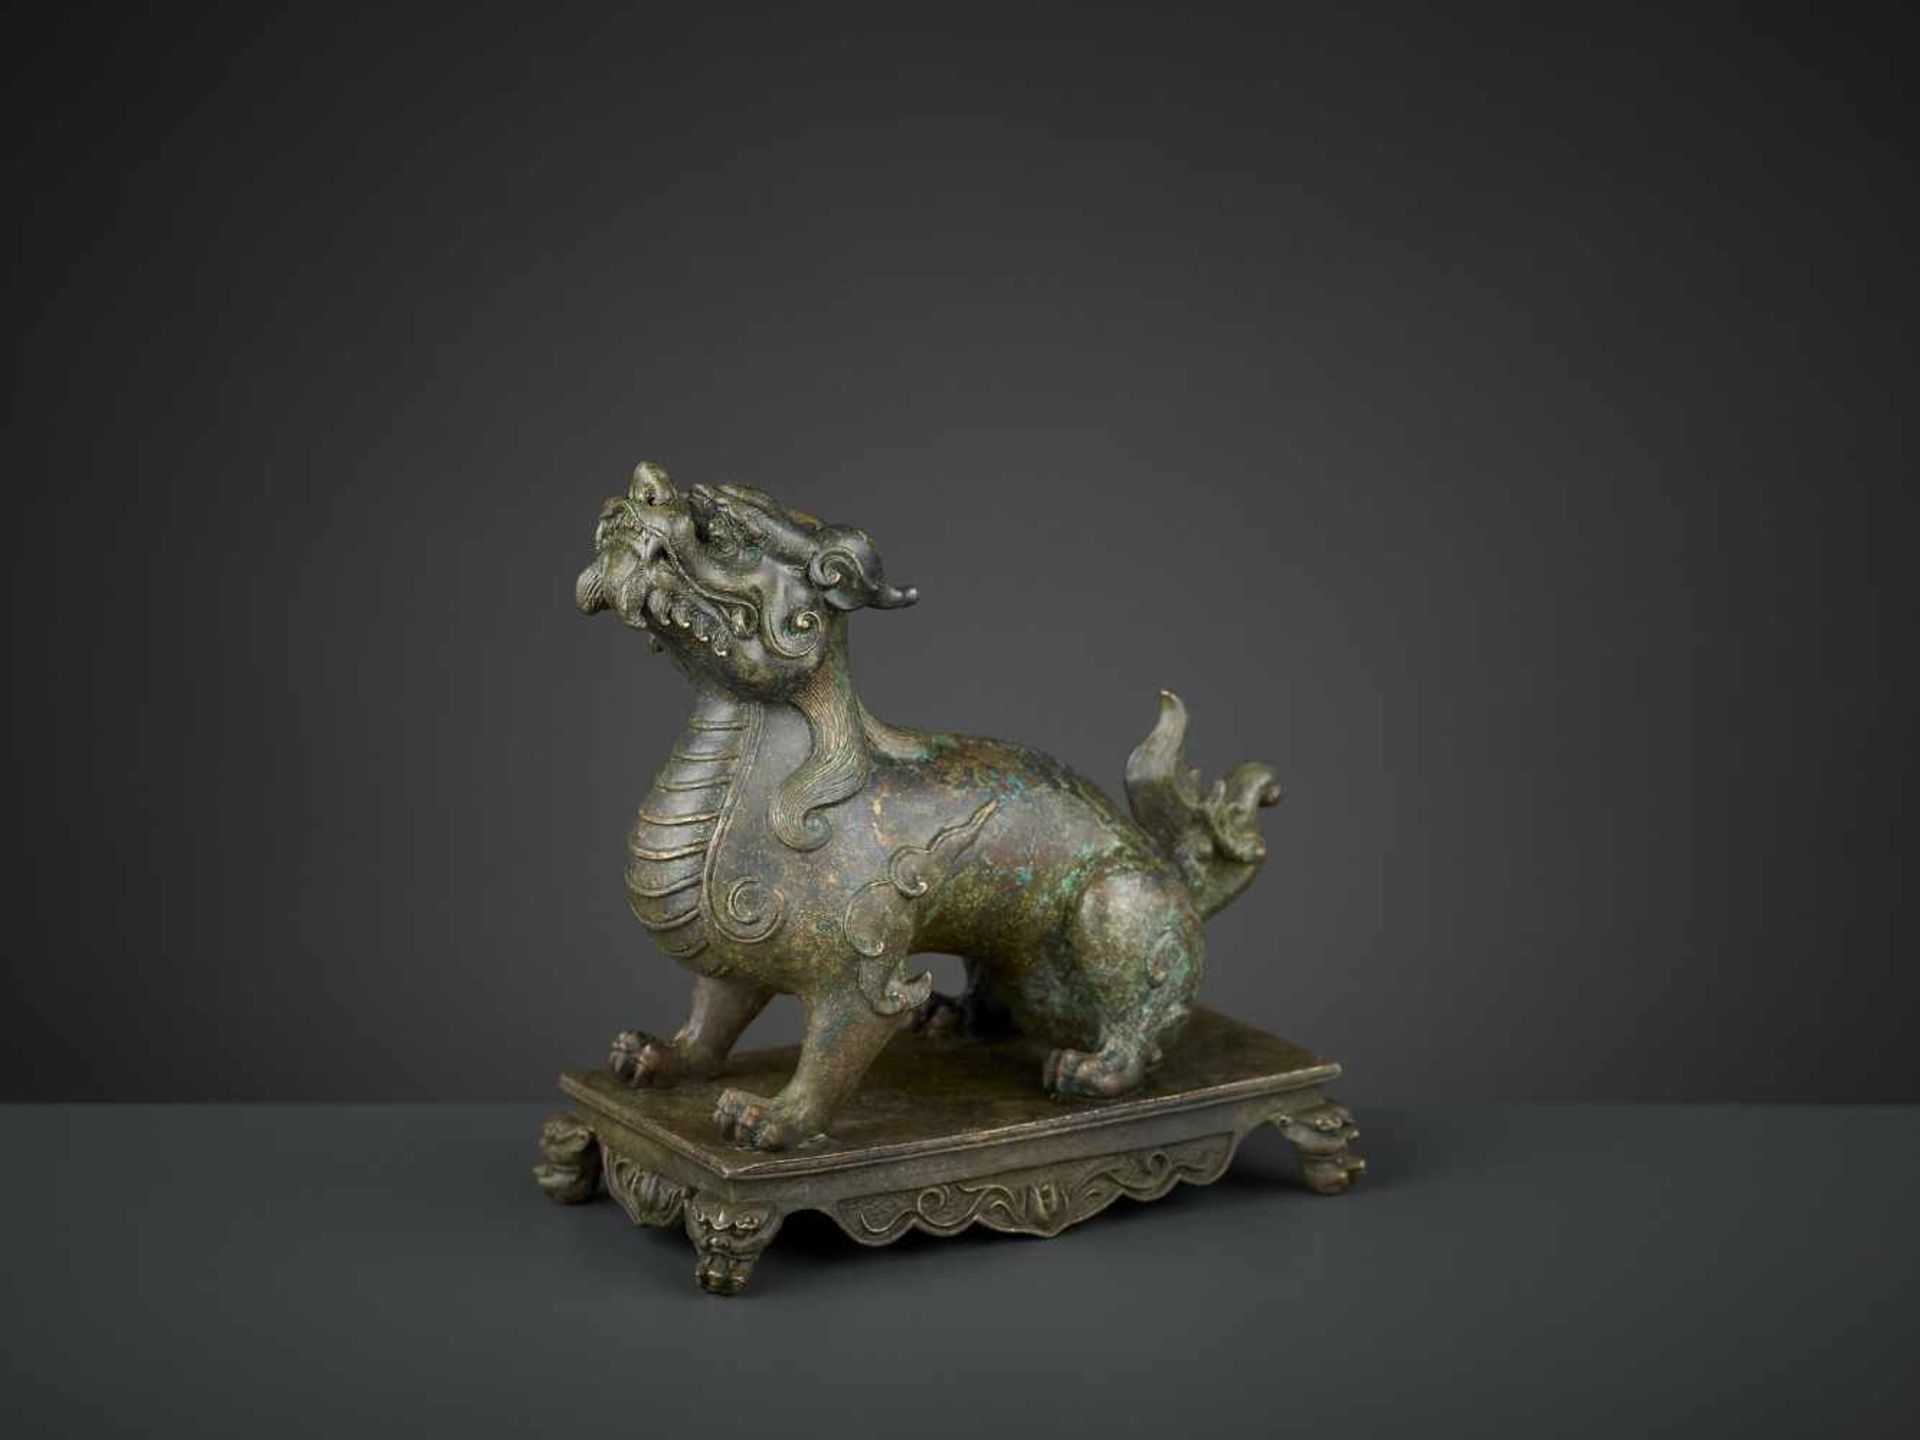 A BRONZE FIGURE OF A QILIN, QIANLONG SIX-CHARACTER MARK AND OF THE PERIOD China, 1736-1795. The